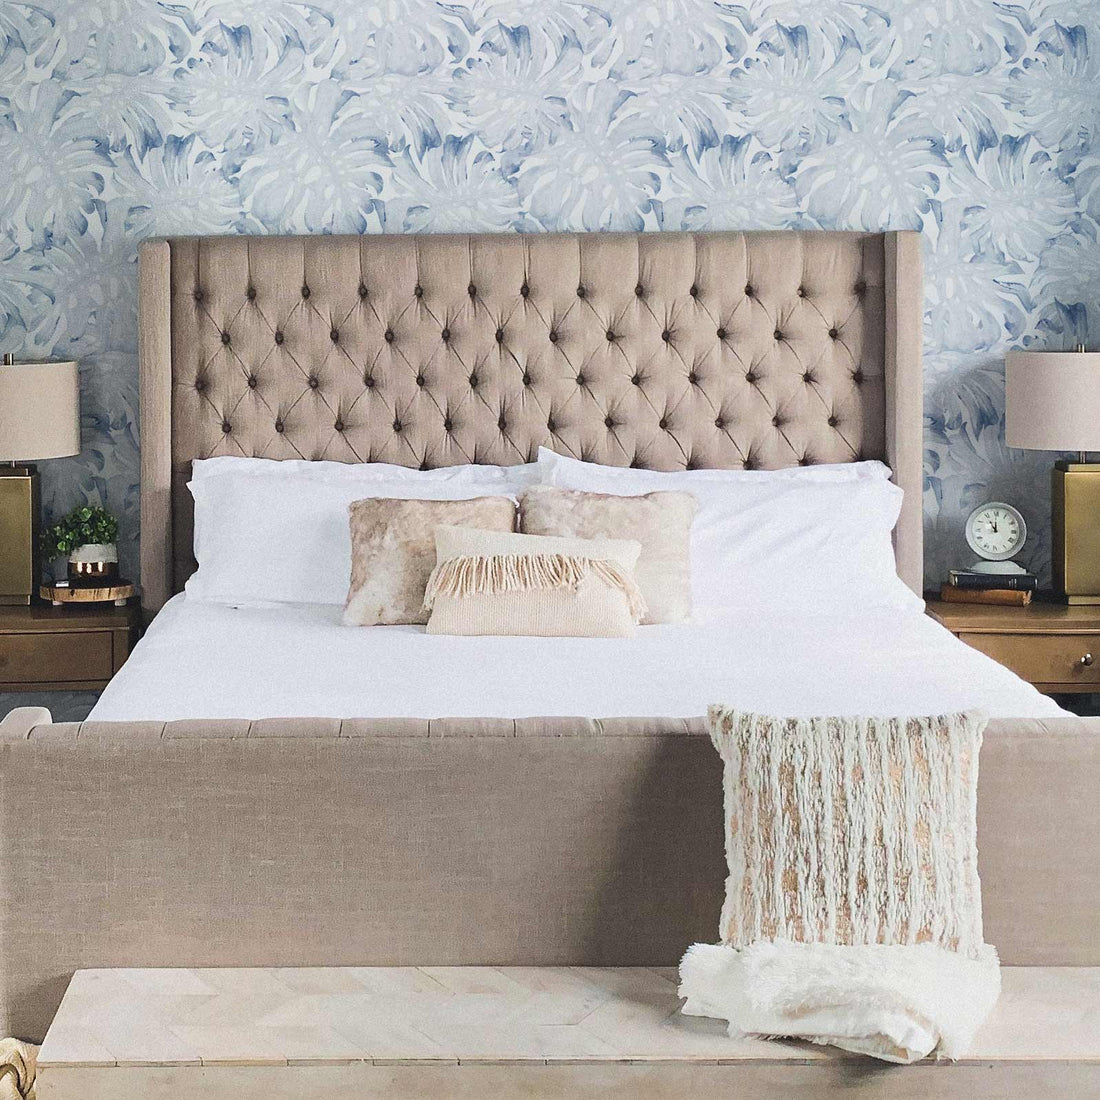 Modern coastal style meets farmhouse bedroom interior with blue tropical removable wallpaper